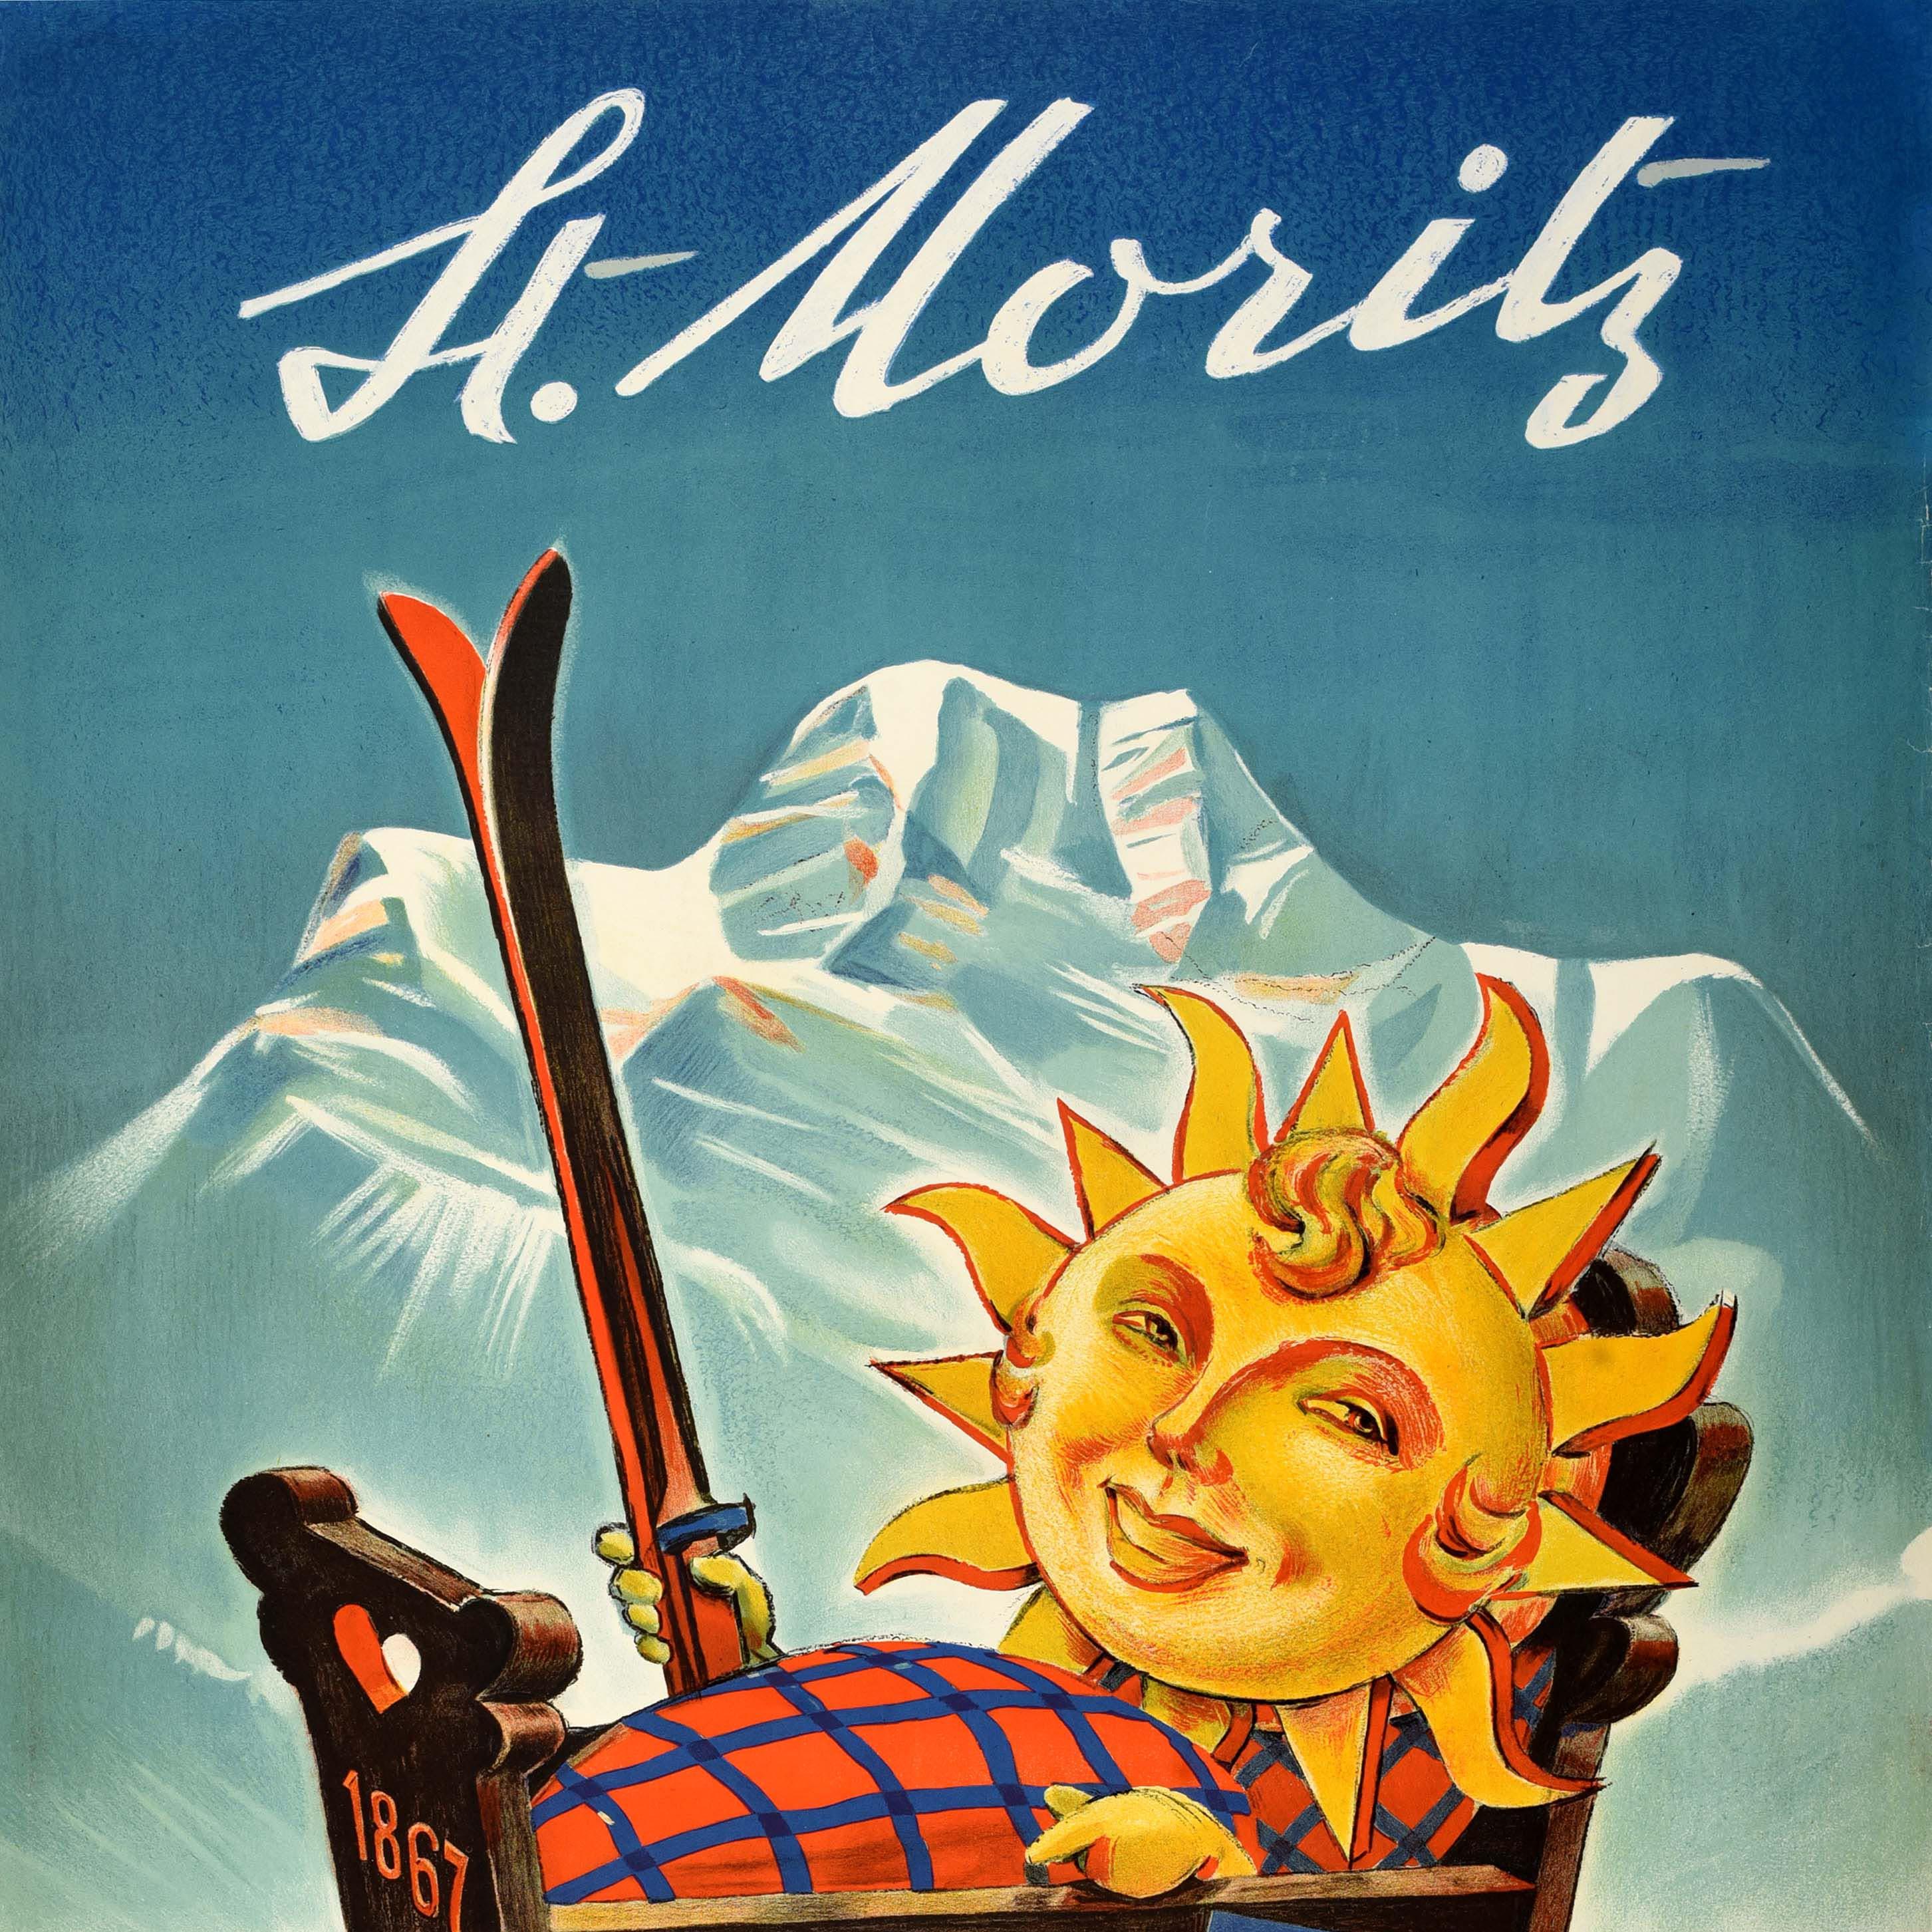 Original vintage winter sport ski travel poster for St Moritz featuring a great design by Hugo Laubi (1888-1959) depicting the St Moritz smiling sun logo as a baby with curly hair lying in a wooden cradle and holding a pair of skis with the snowy